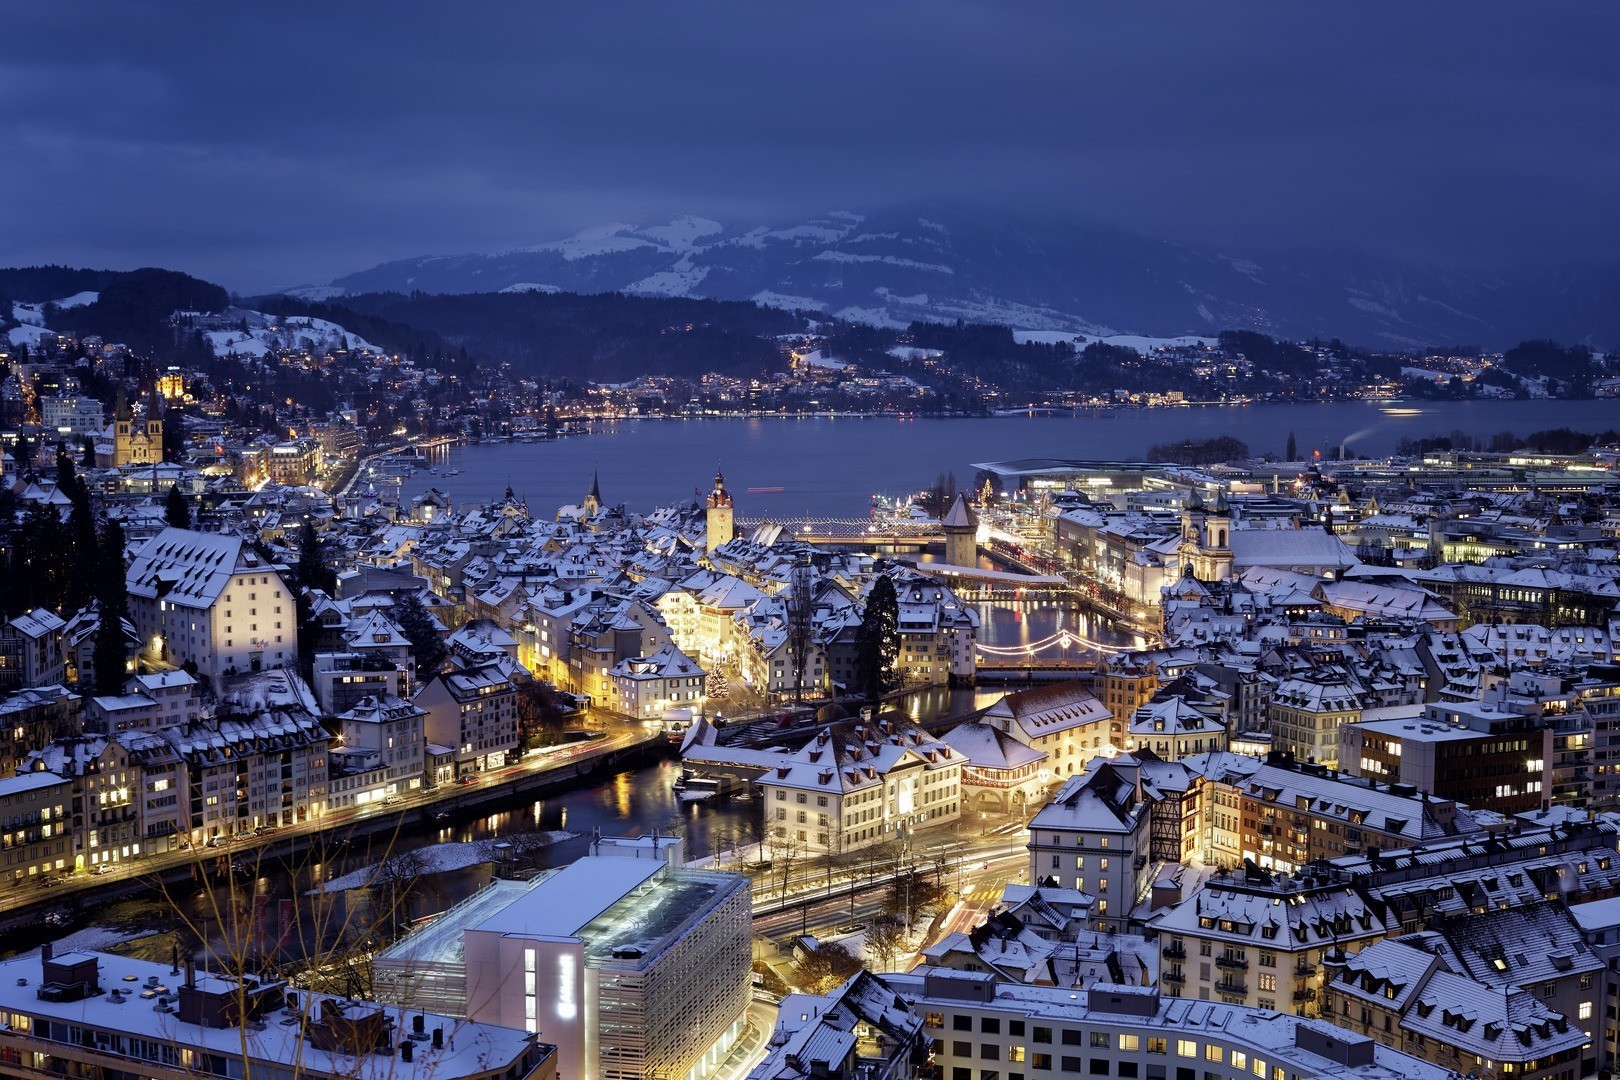 Lucerne 2021 Winter World University Games postponed due to COVID-19